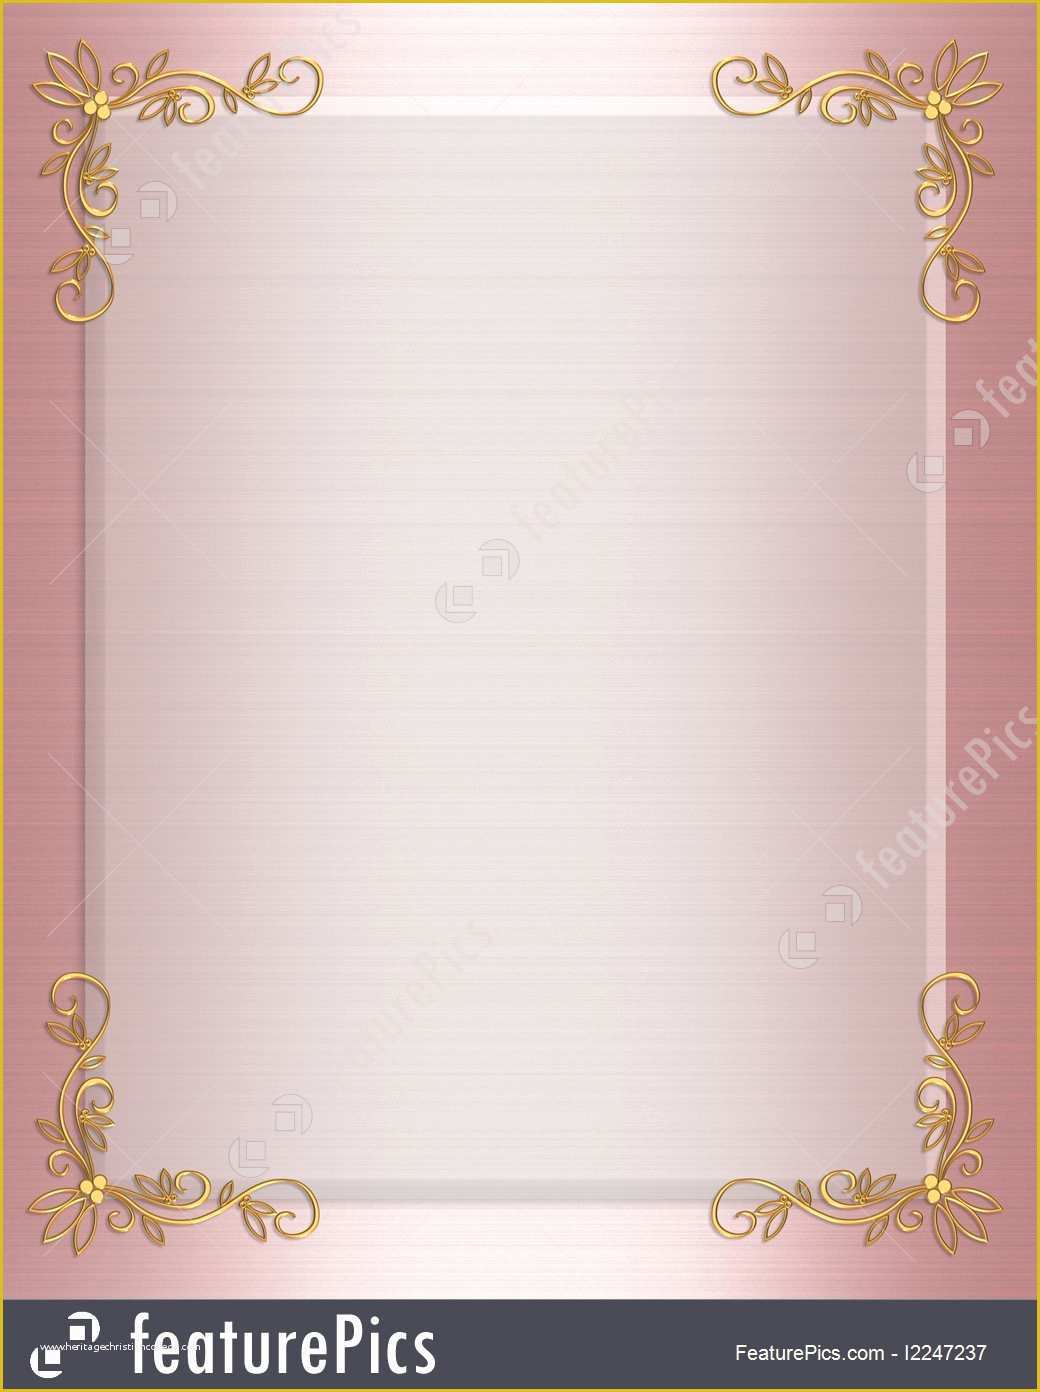 Border Invitation Templates Free Of Pink and Gold Invitations Templates